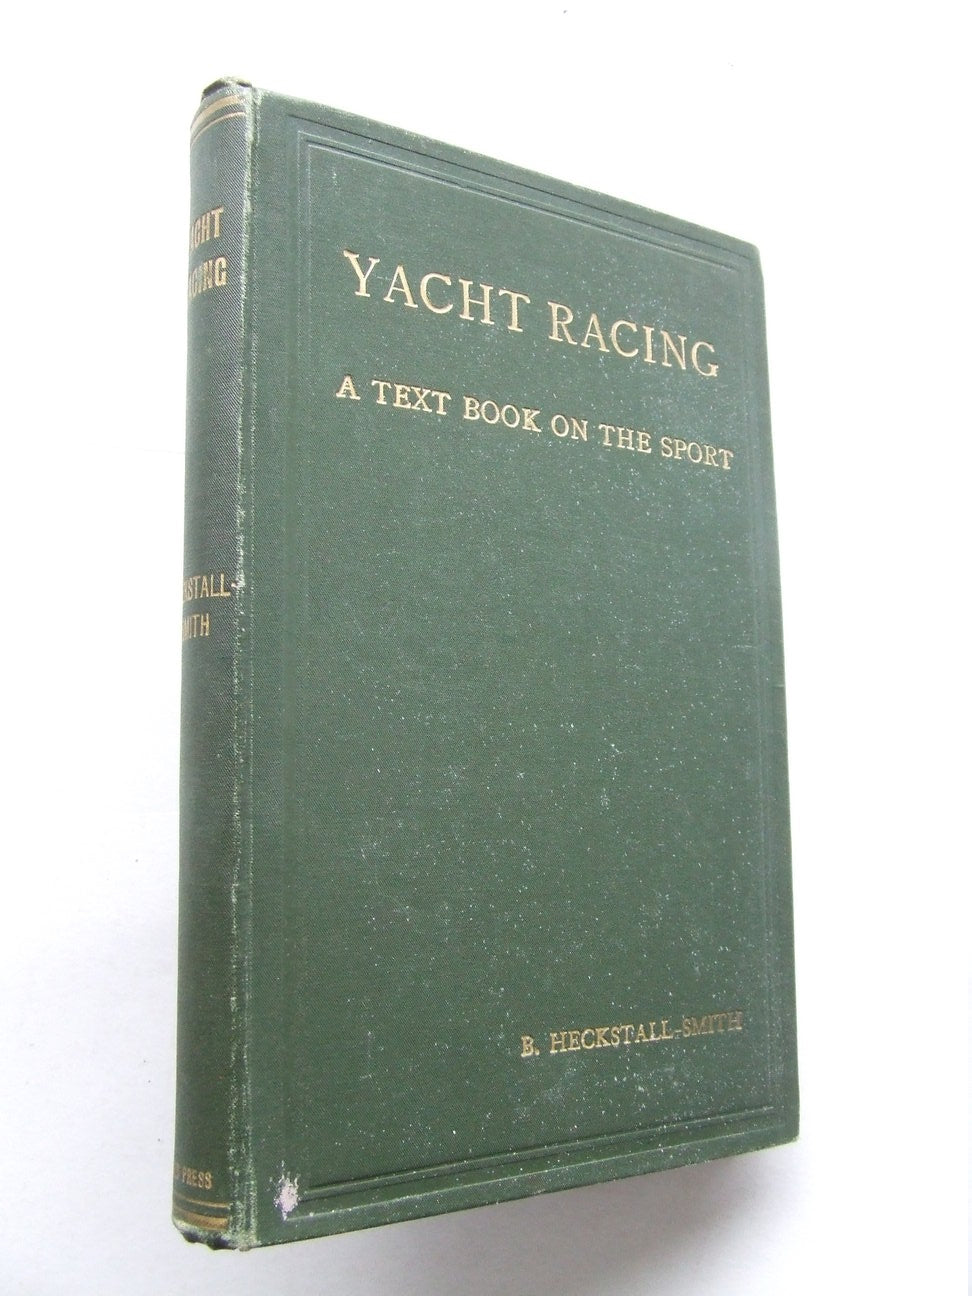 Yacht Racing, a text book on the sport